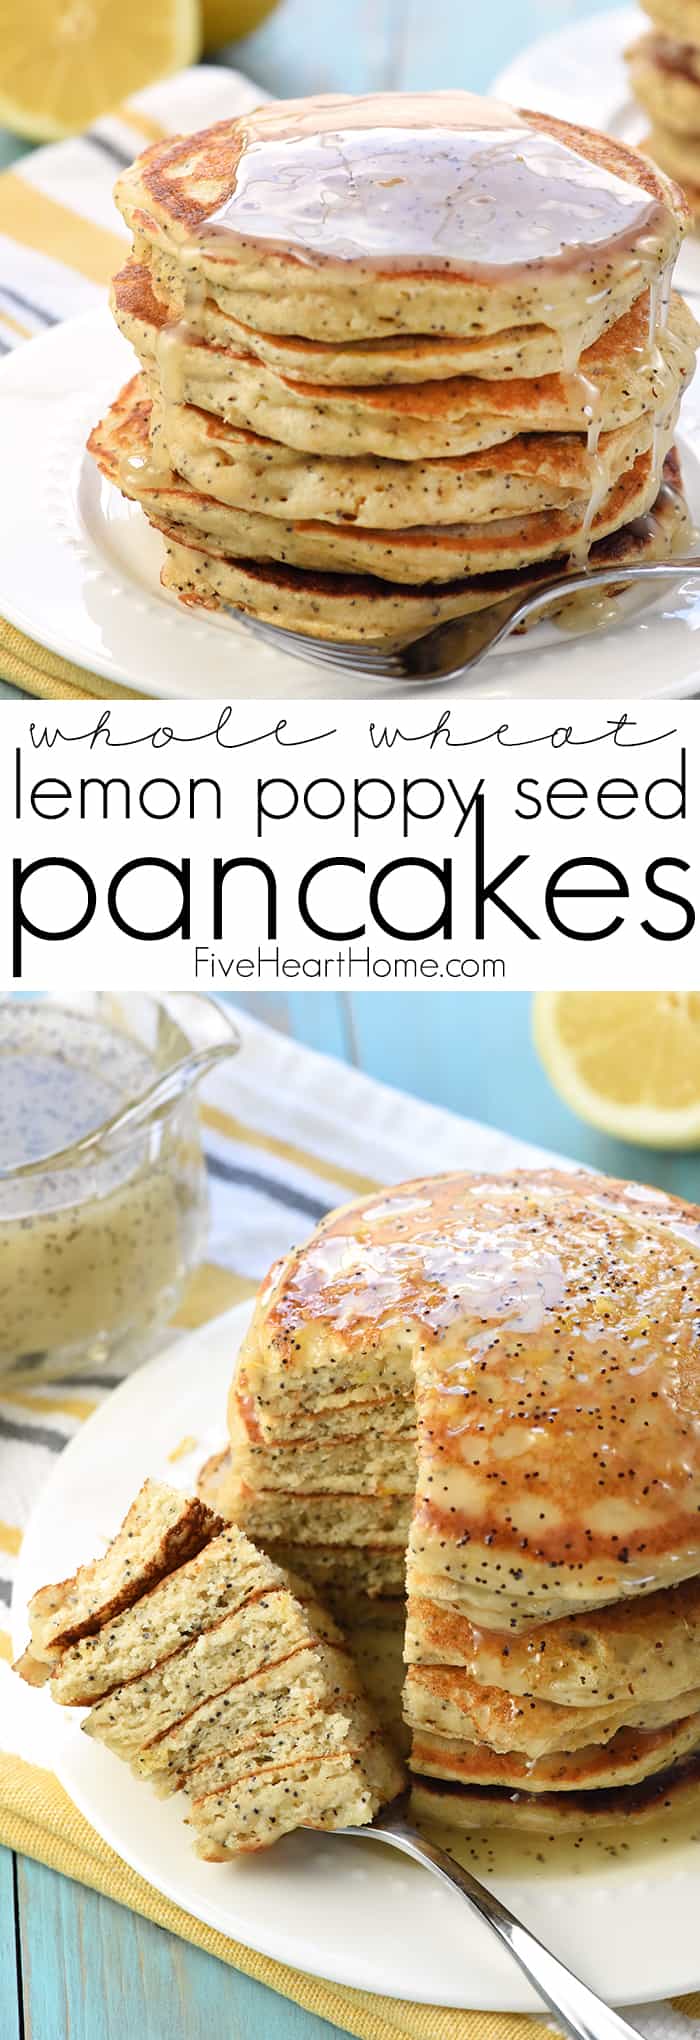 Whole Wheat Lemon Poppy Seed Pancakes ~ wholesome and delicious pancakes drizzled with a scrumptious Lemon Poppy Seed Syrup make a lovely spring or summer breakfast! | FiveHeartHome.com via @fivehearthome